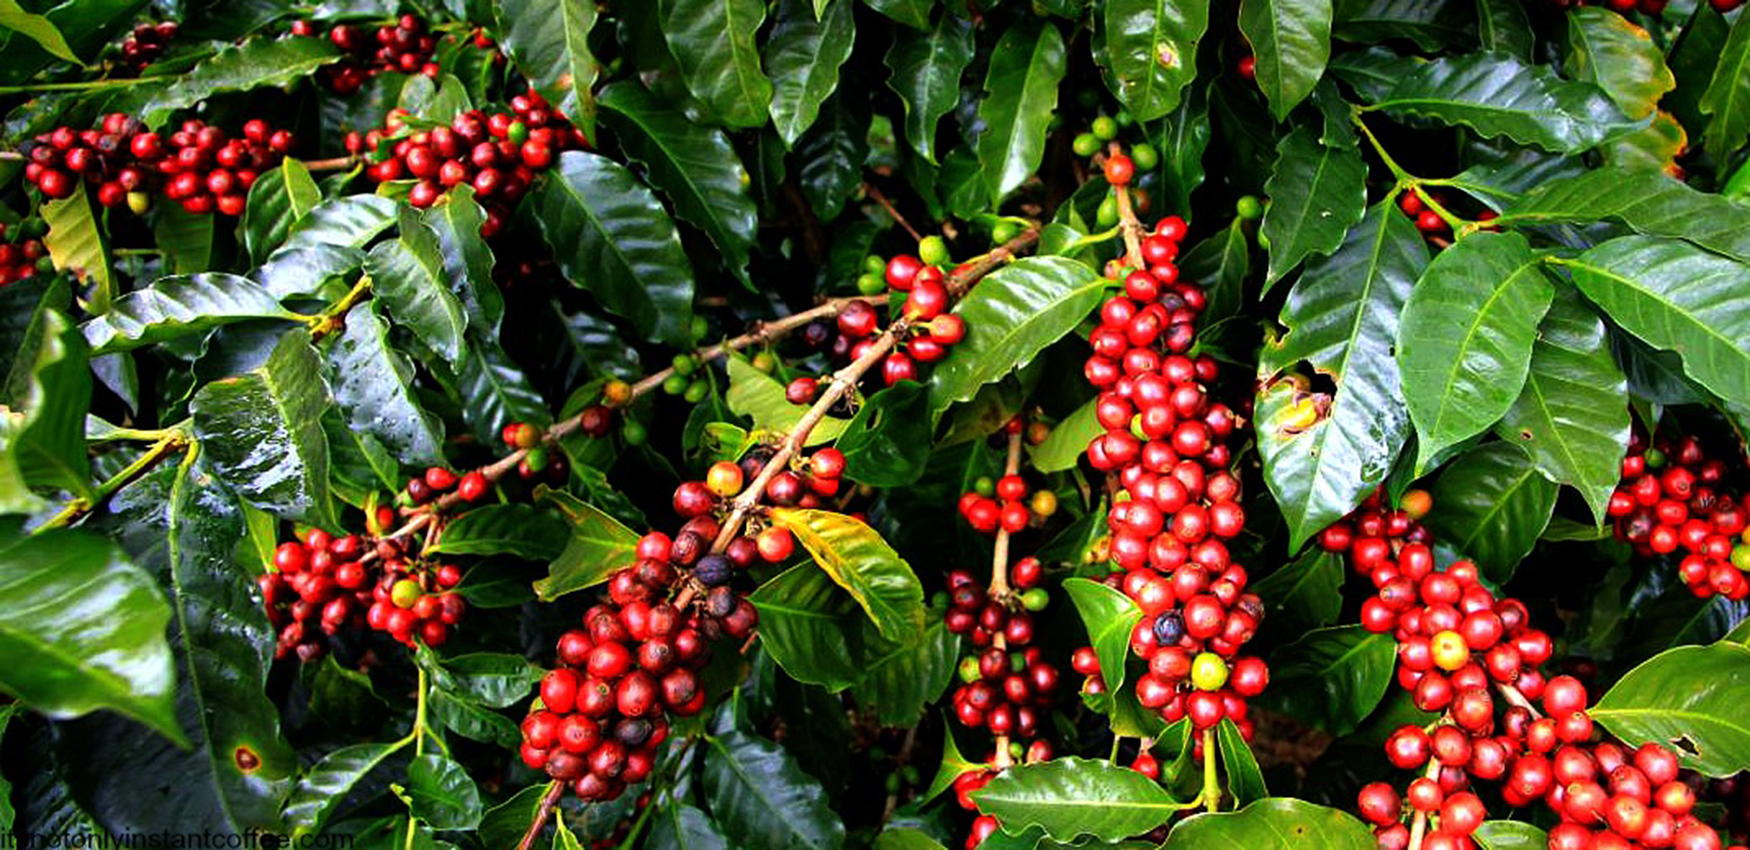 Coffee and Cocoa among producers in the Cusco region